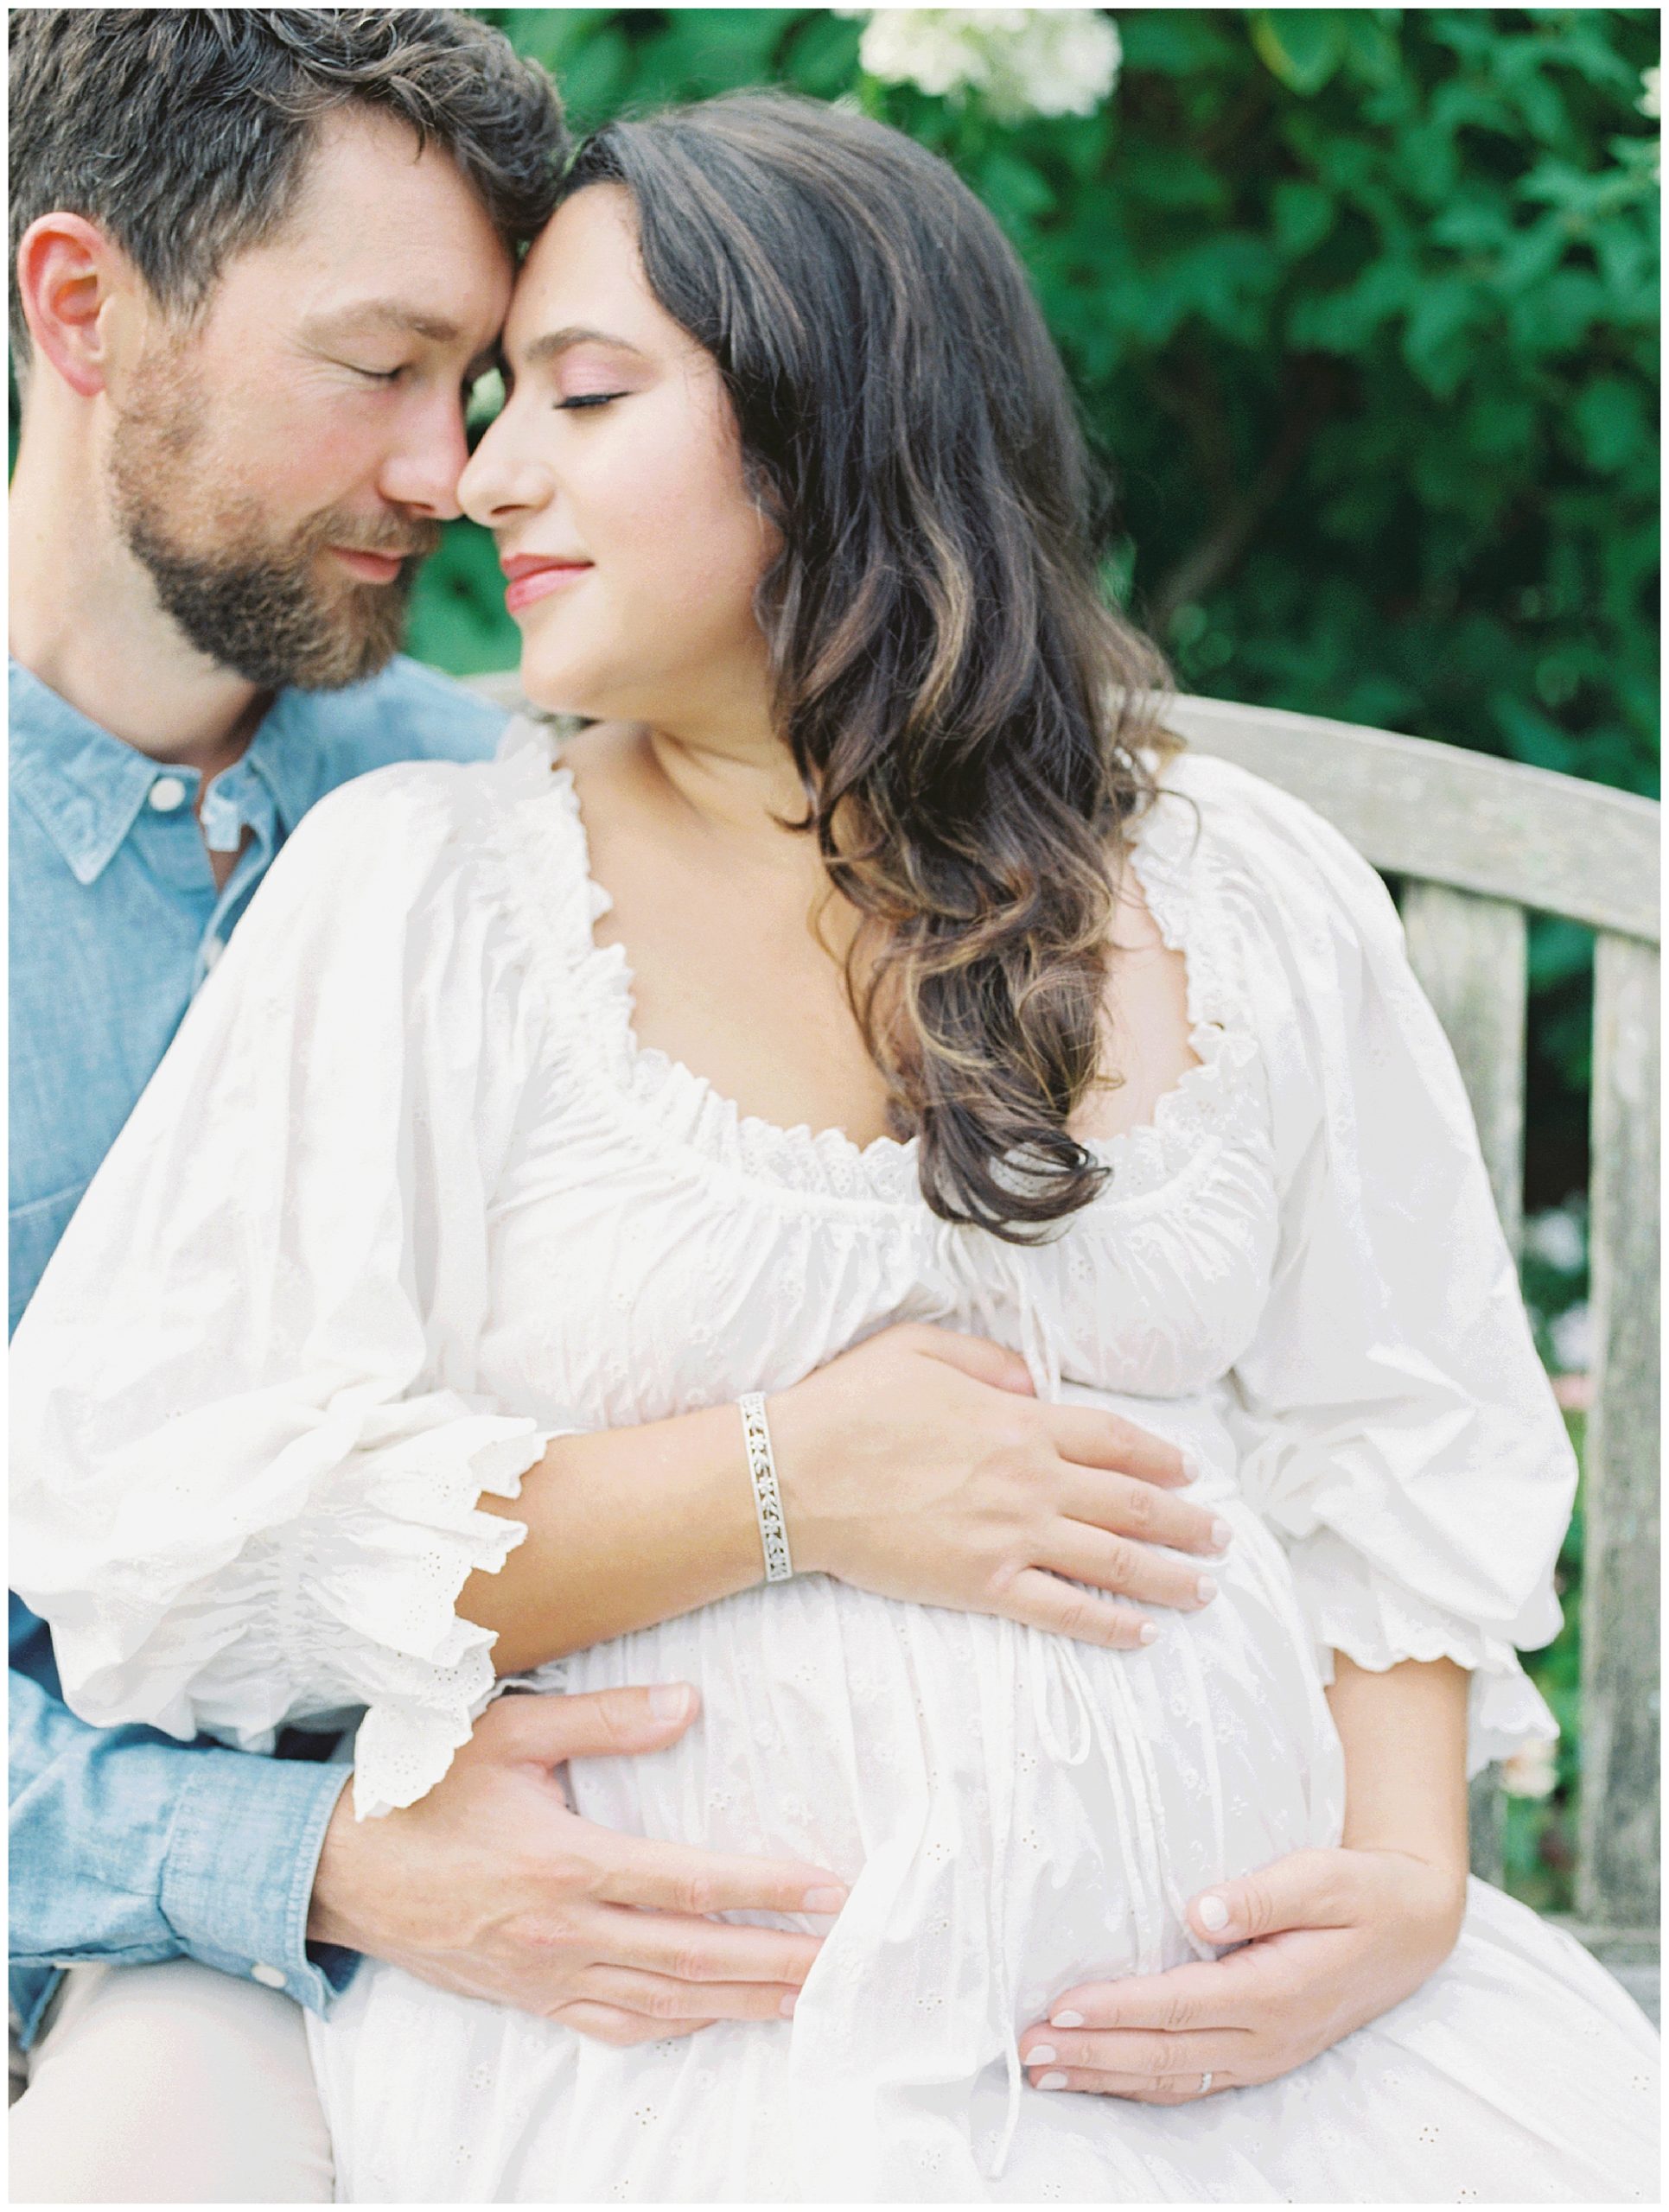 Expecting parents sit together on a bench, leaning in to one another, during their maternity session at Brookside Gardens.